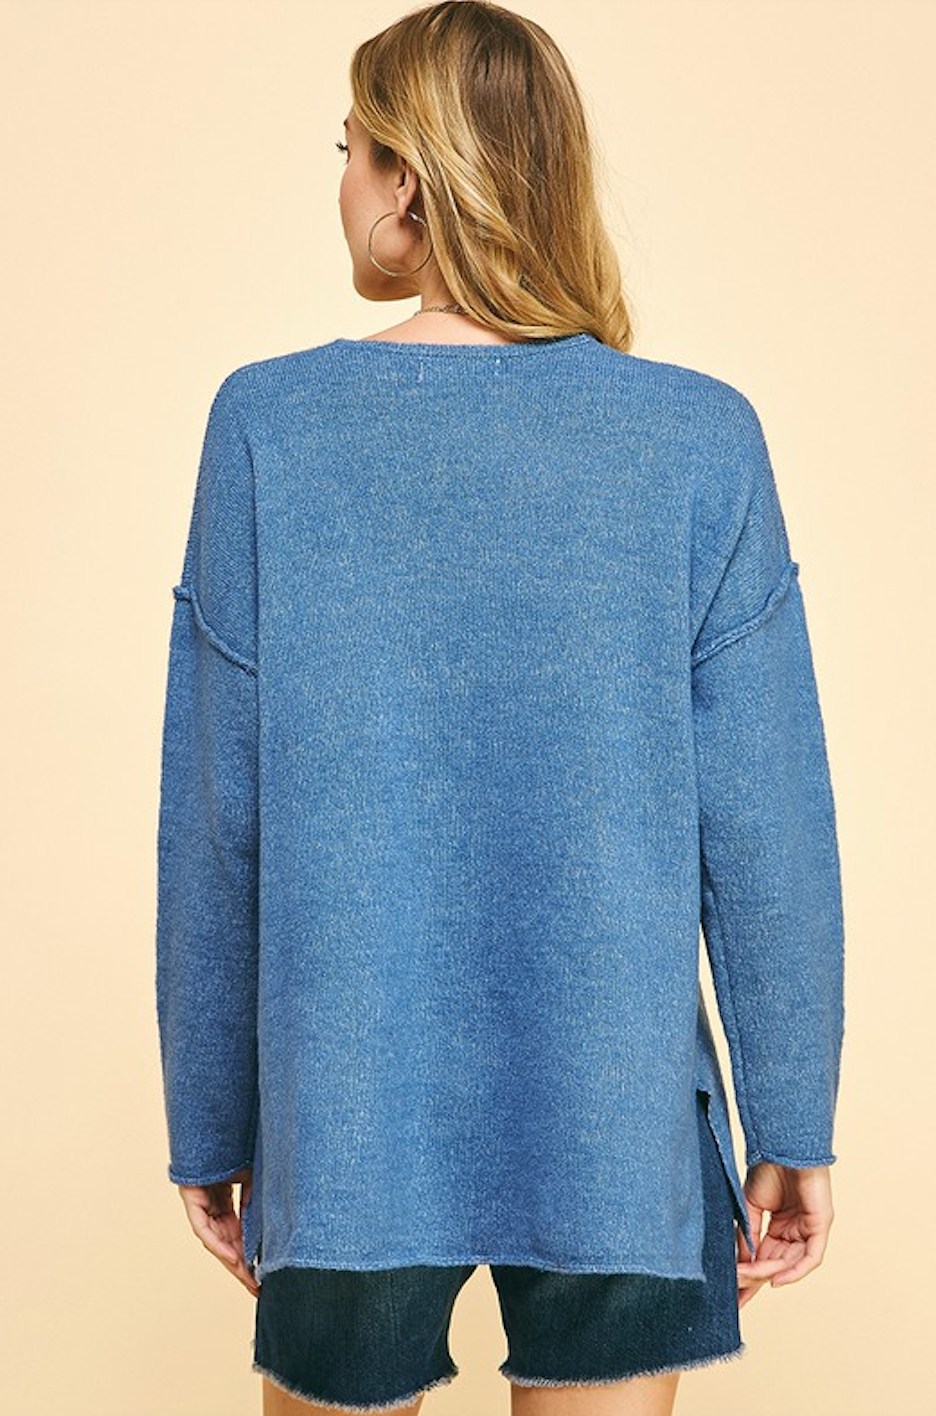 CLAIRE KNIT SWEATER IN DENIM BLUE